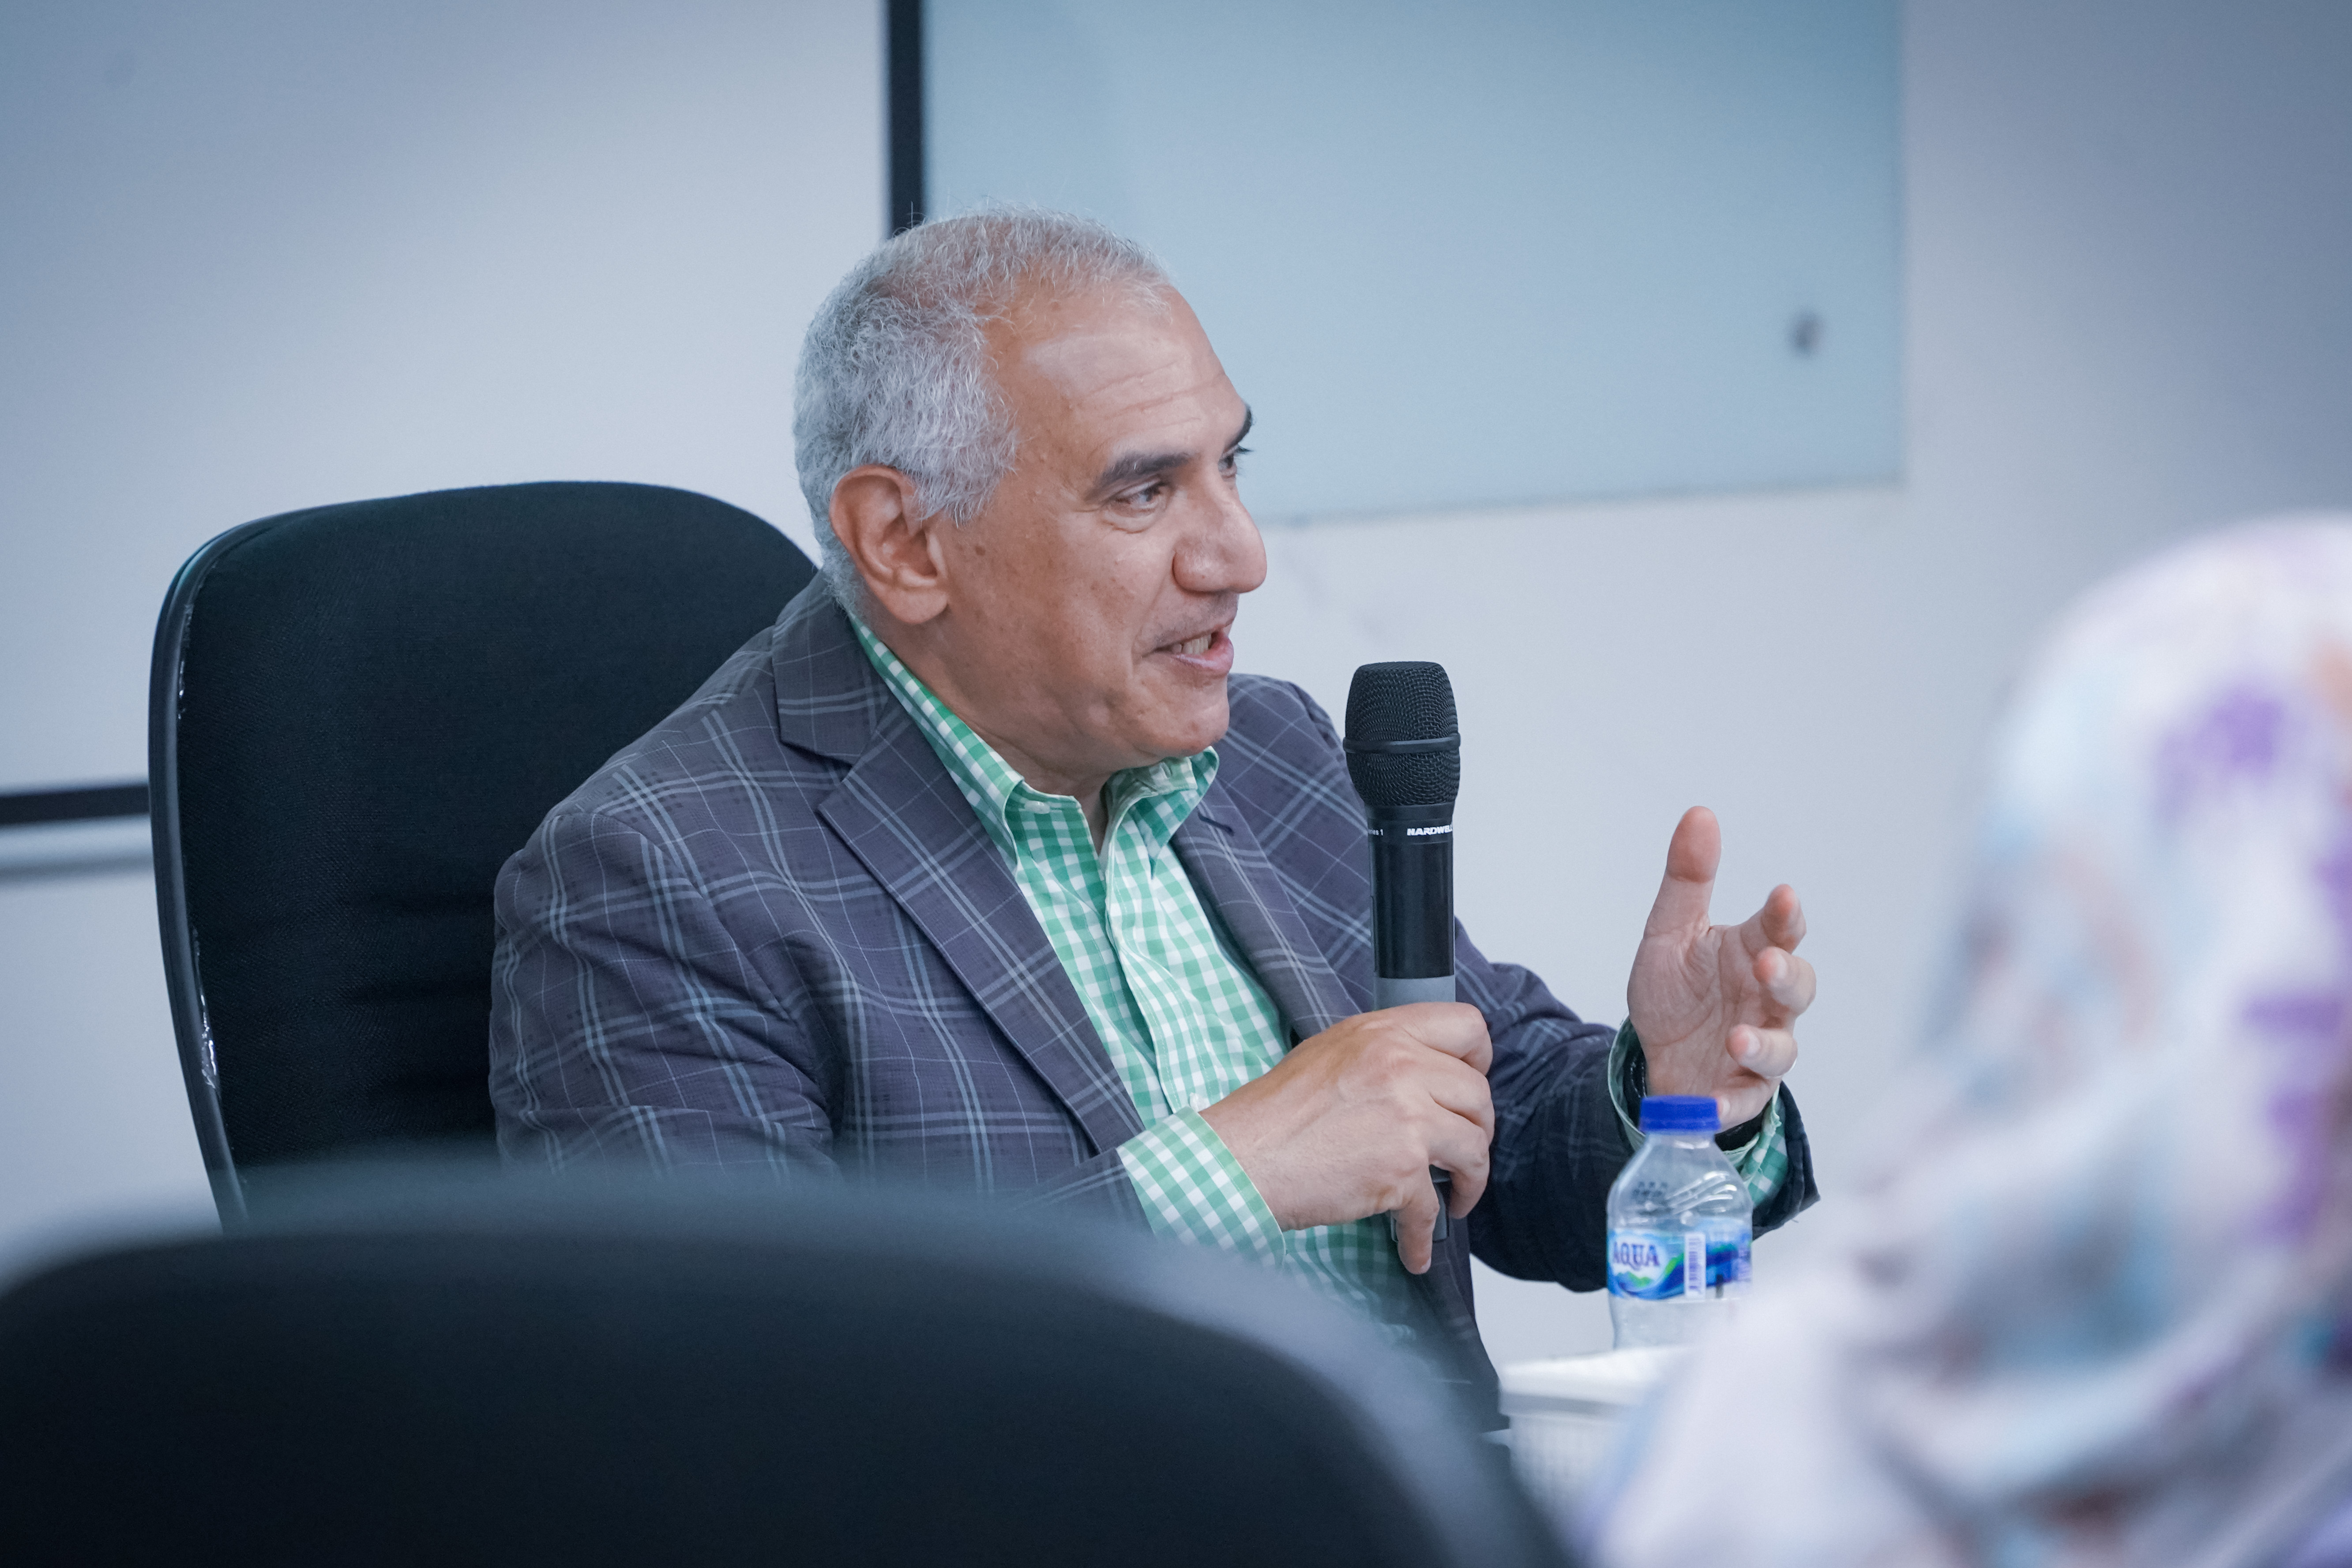 Prof. Mohammad Fadel’s Lecture on Islamic Law and Global Justice at UIII